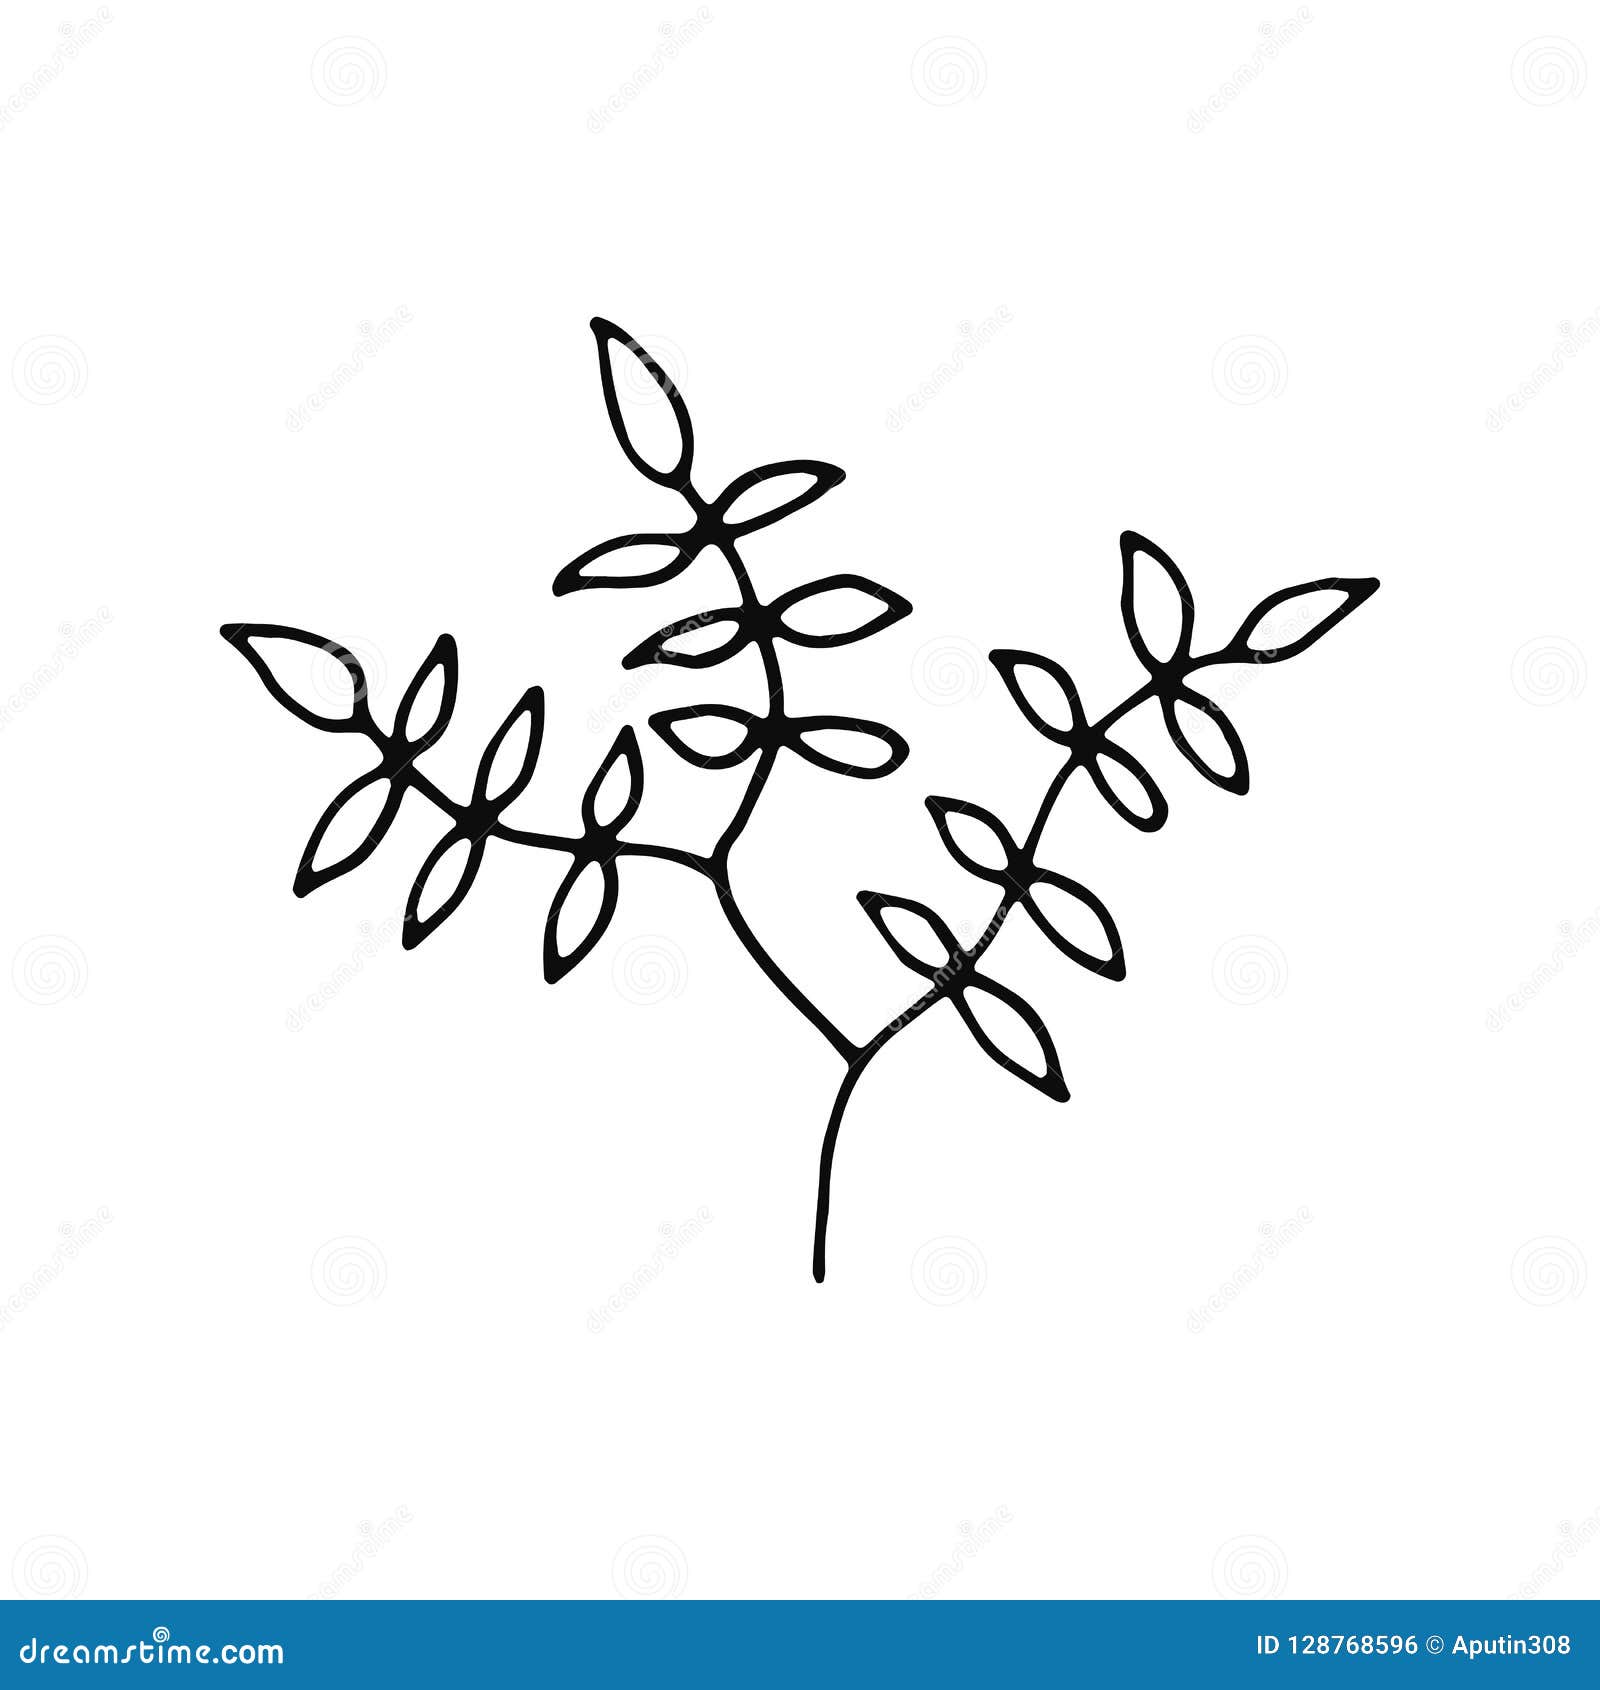 How to sketch twig with leaf and flower  Pencil Sketch  YouTube